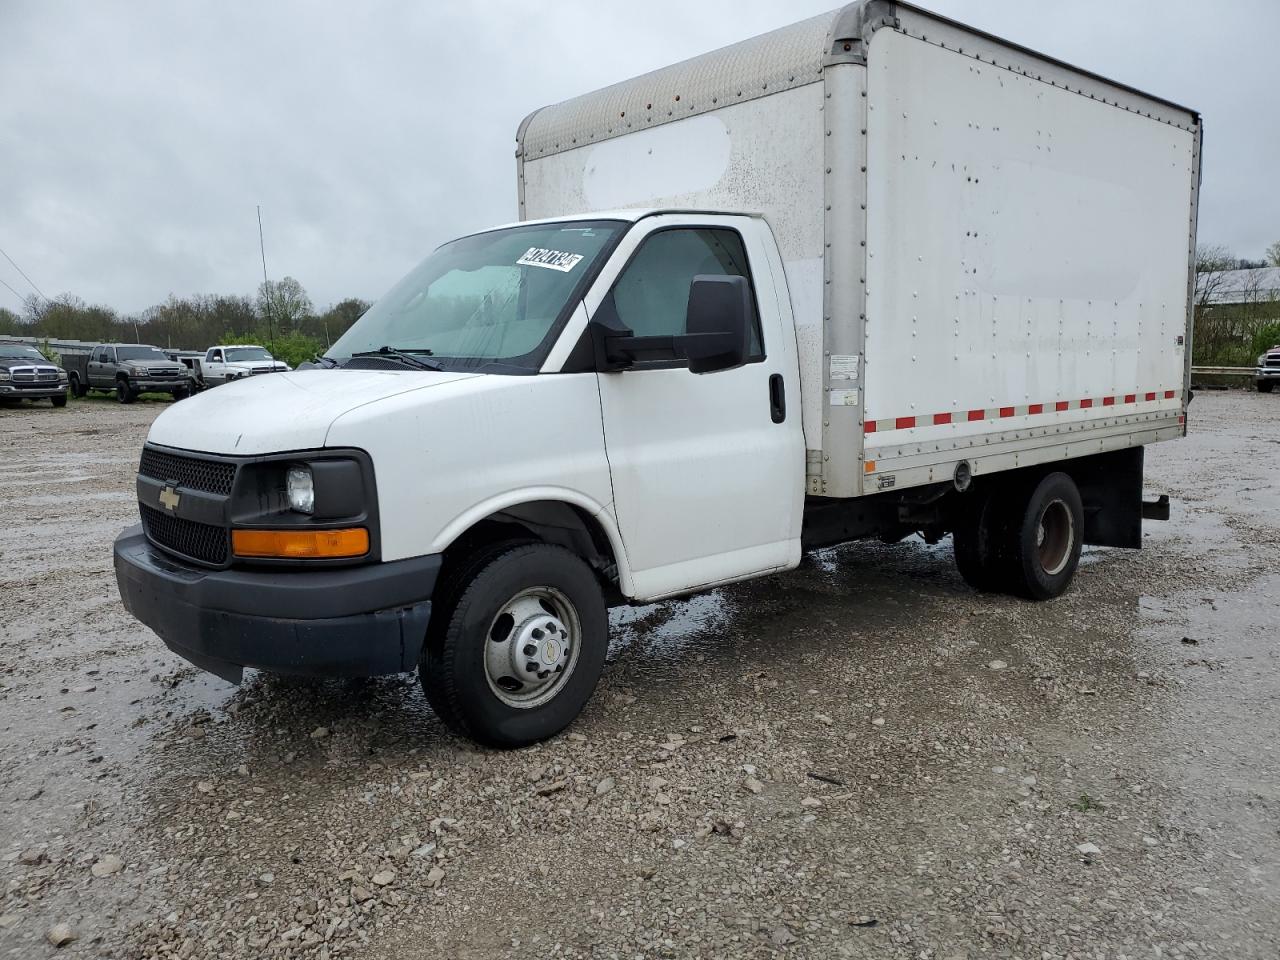 vin: 1GB3G2CGXC1158099 1GB3G2CGXC1158099 2012 chevrolet express 6000 for Sale in 40342 9225, Ky - Lexington West, Lawrenceburg, Kentucky, USA